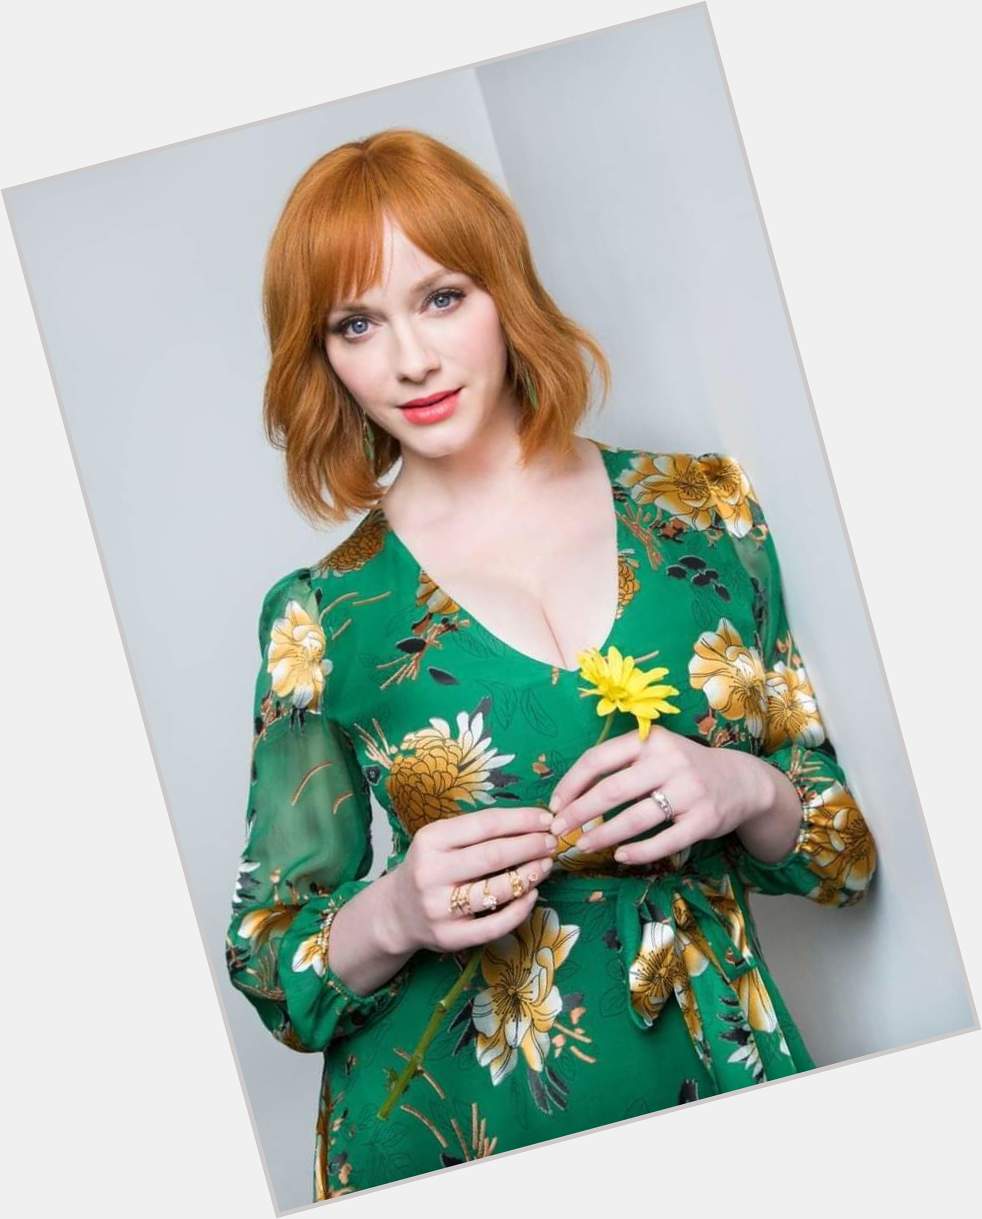 Happy birthday to my forever celebrity crush the gorgeous and talented Christina Hendricks 